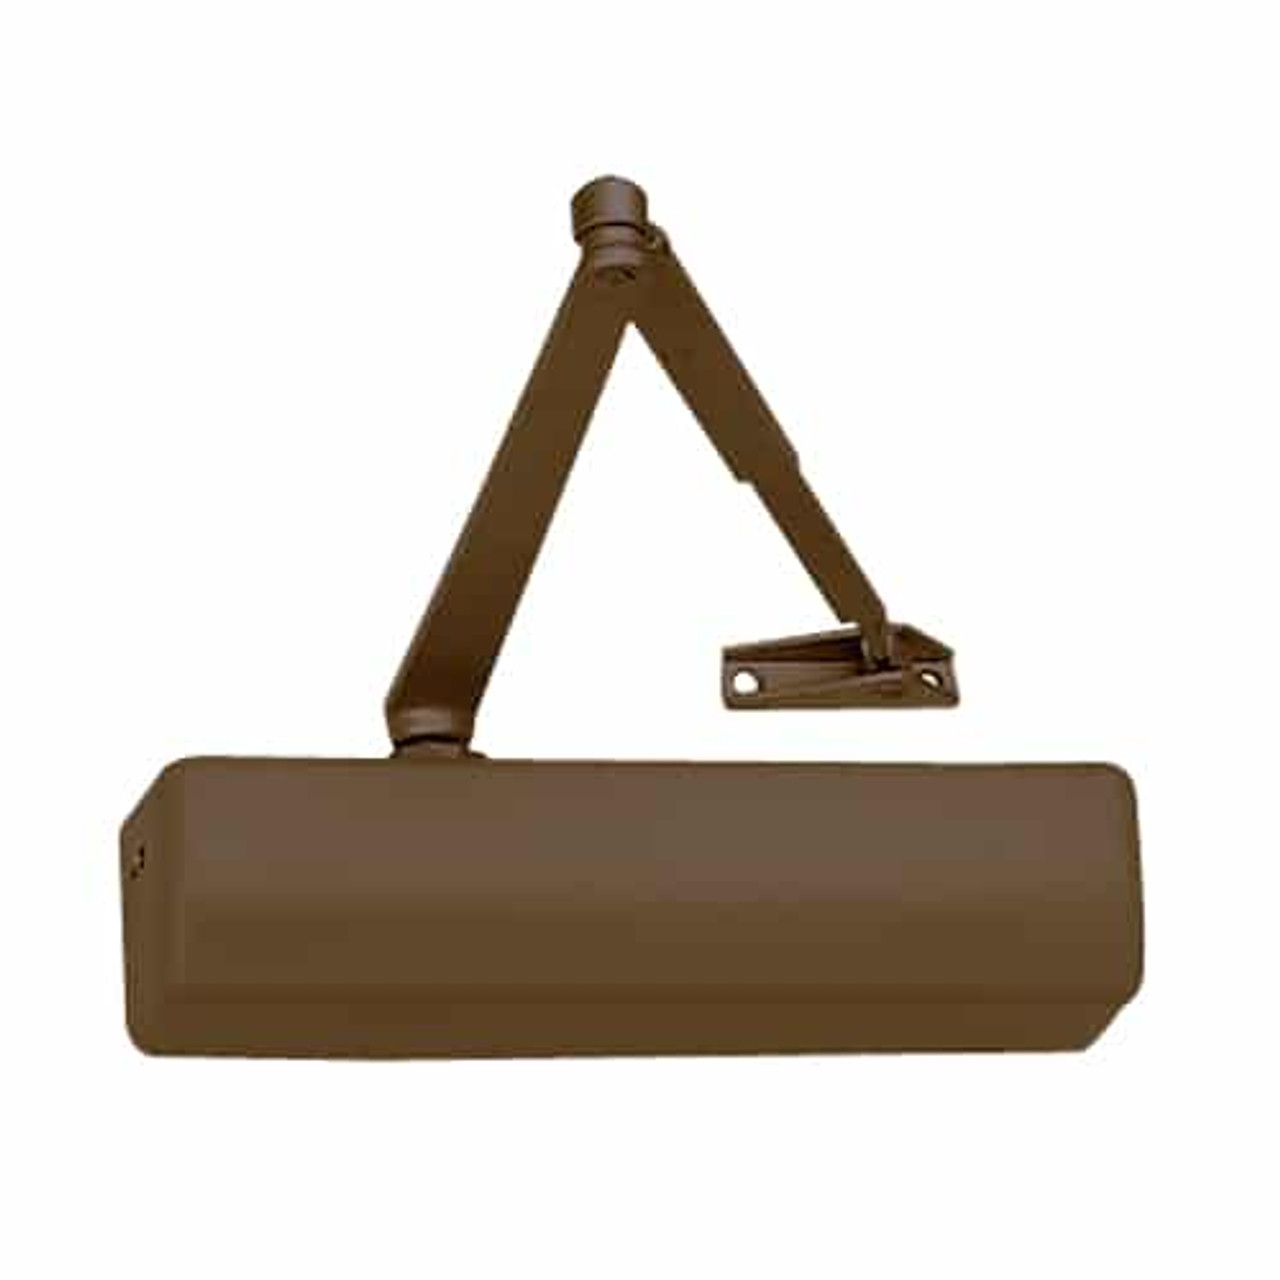 DC6200-A1-690-M54 Corbin 6000 Series Multi-Sized Regular Arm Door Closers with Hold Open Arm in Dark Bronze Finish